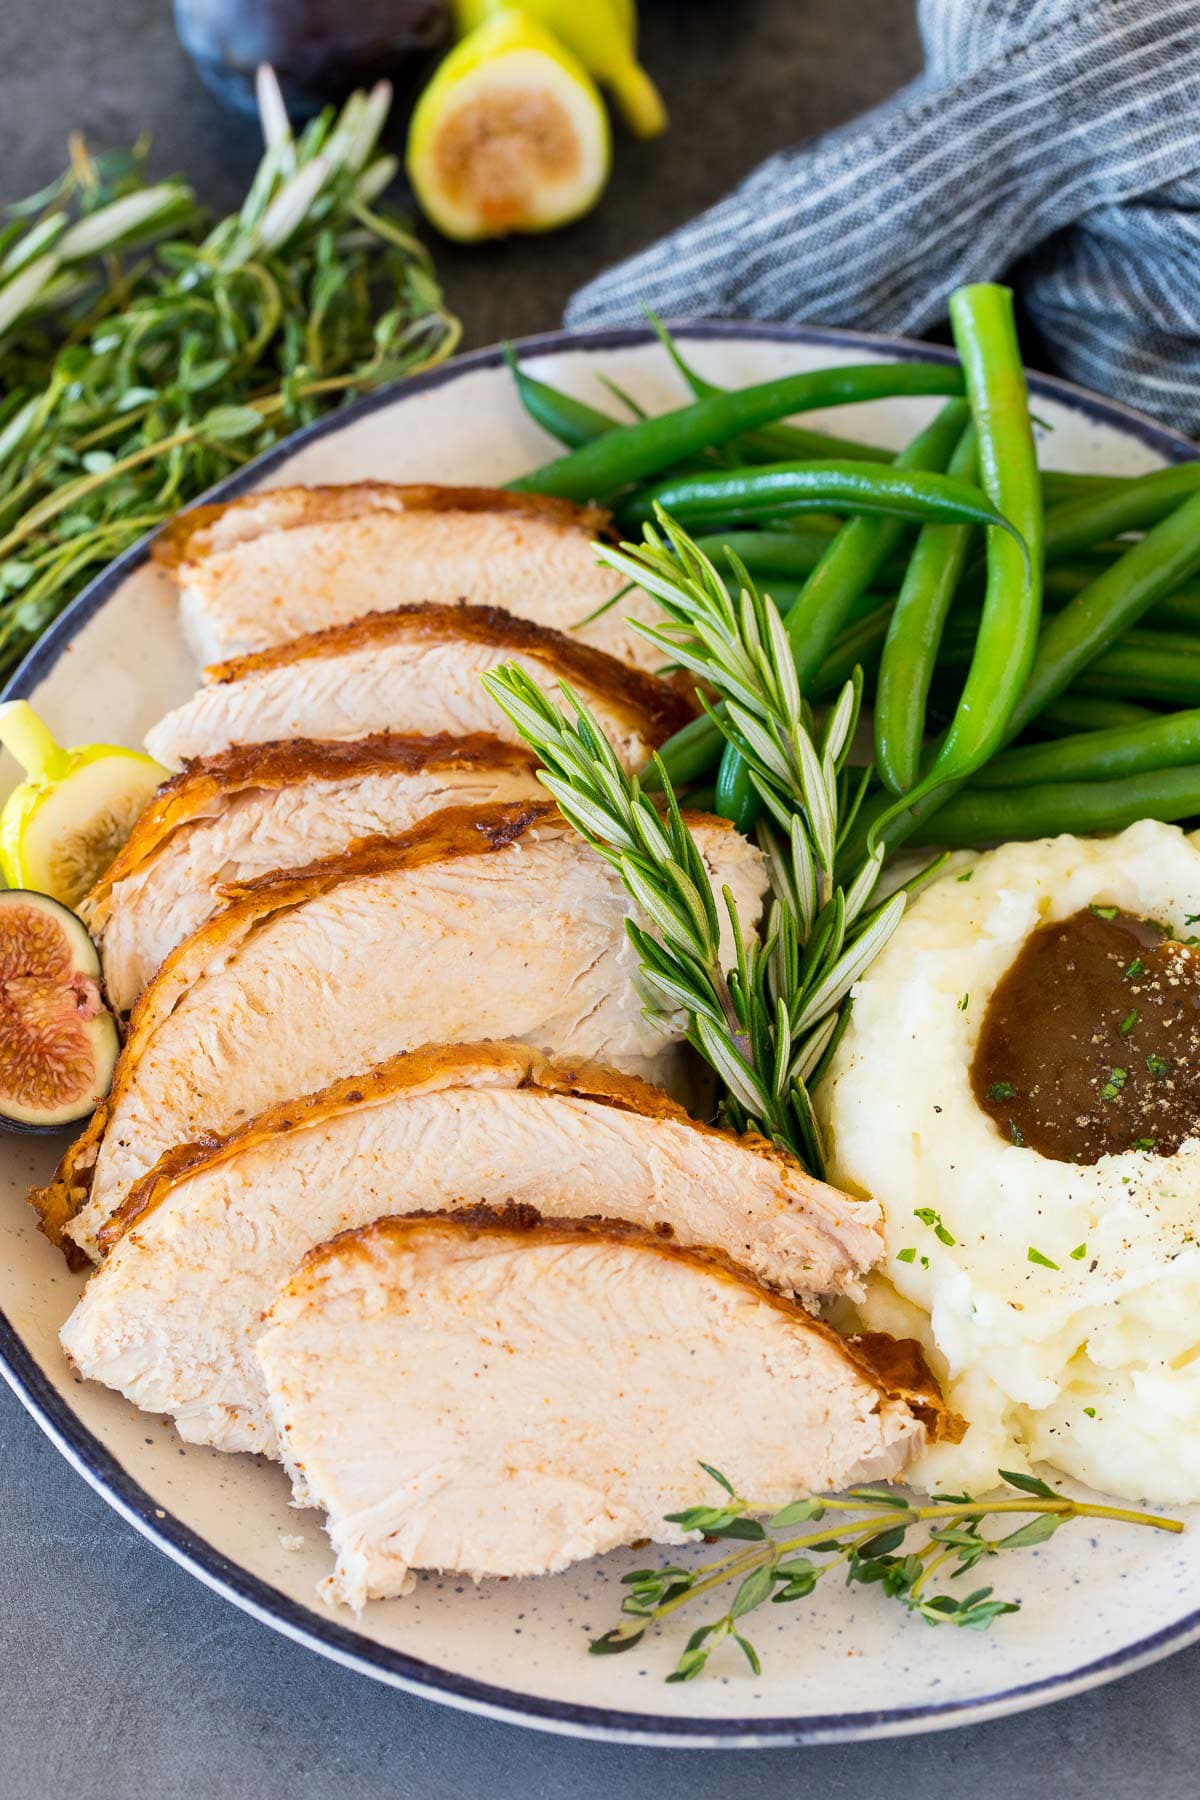 Sliced Cajun turkey on a plate with mashed potatoes and green beans.